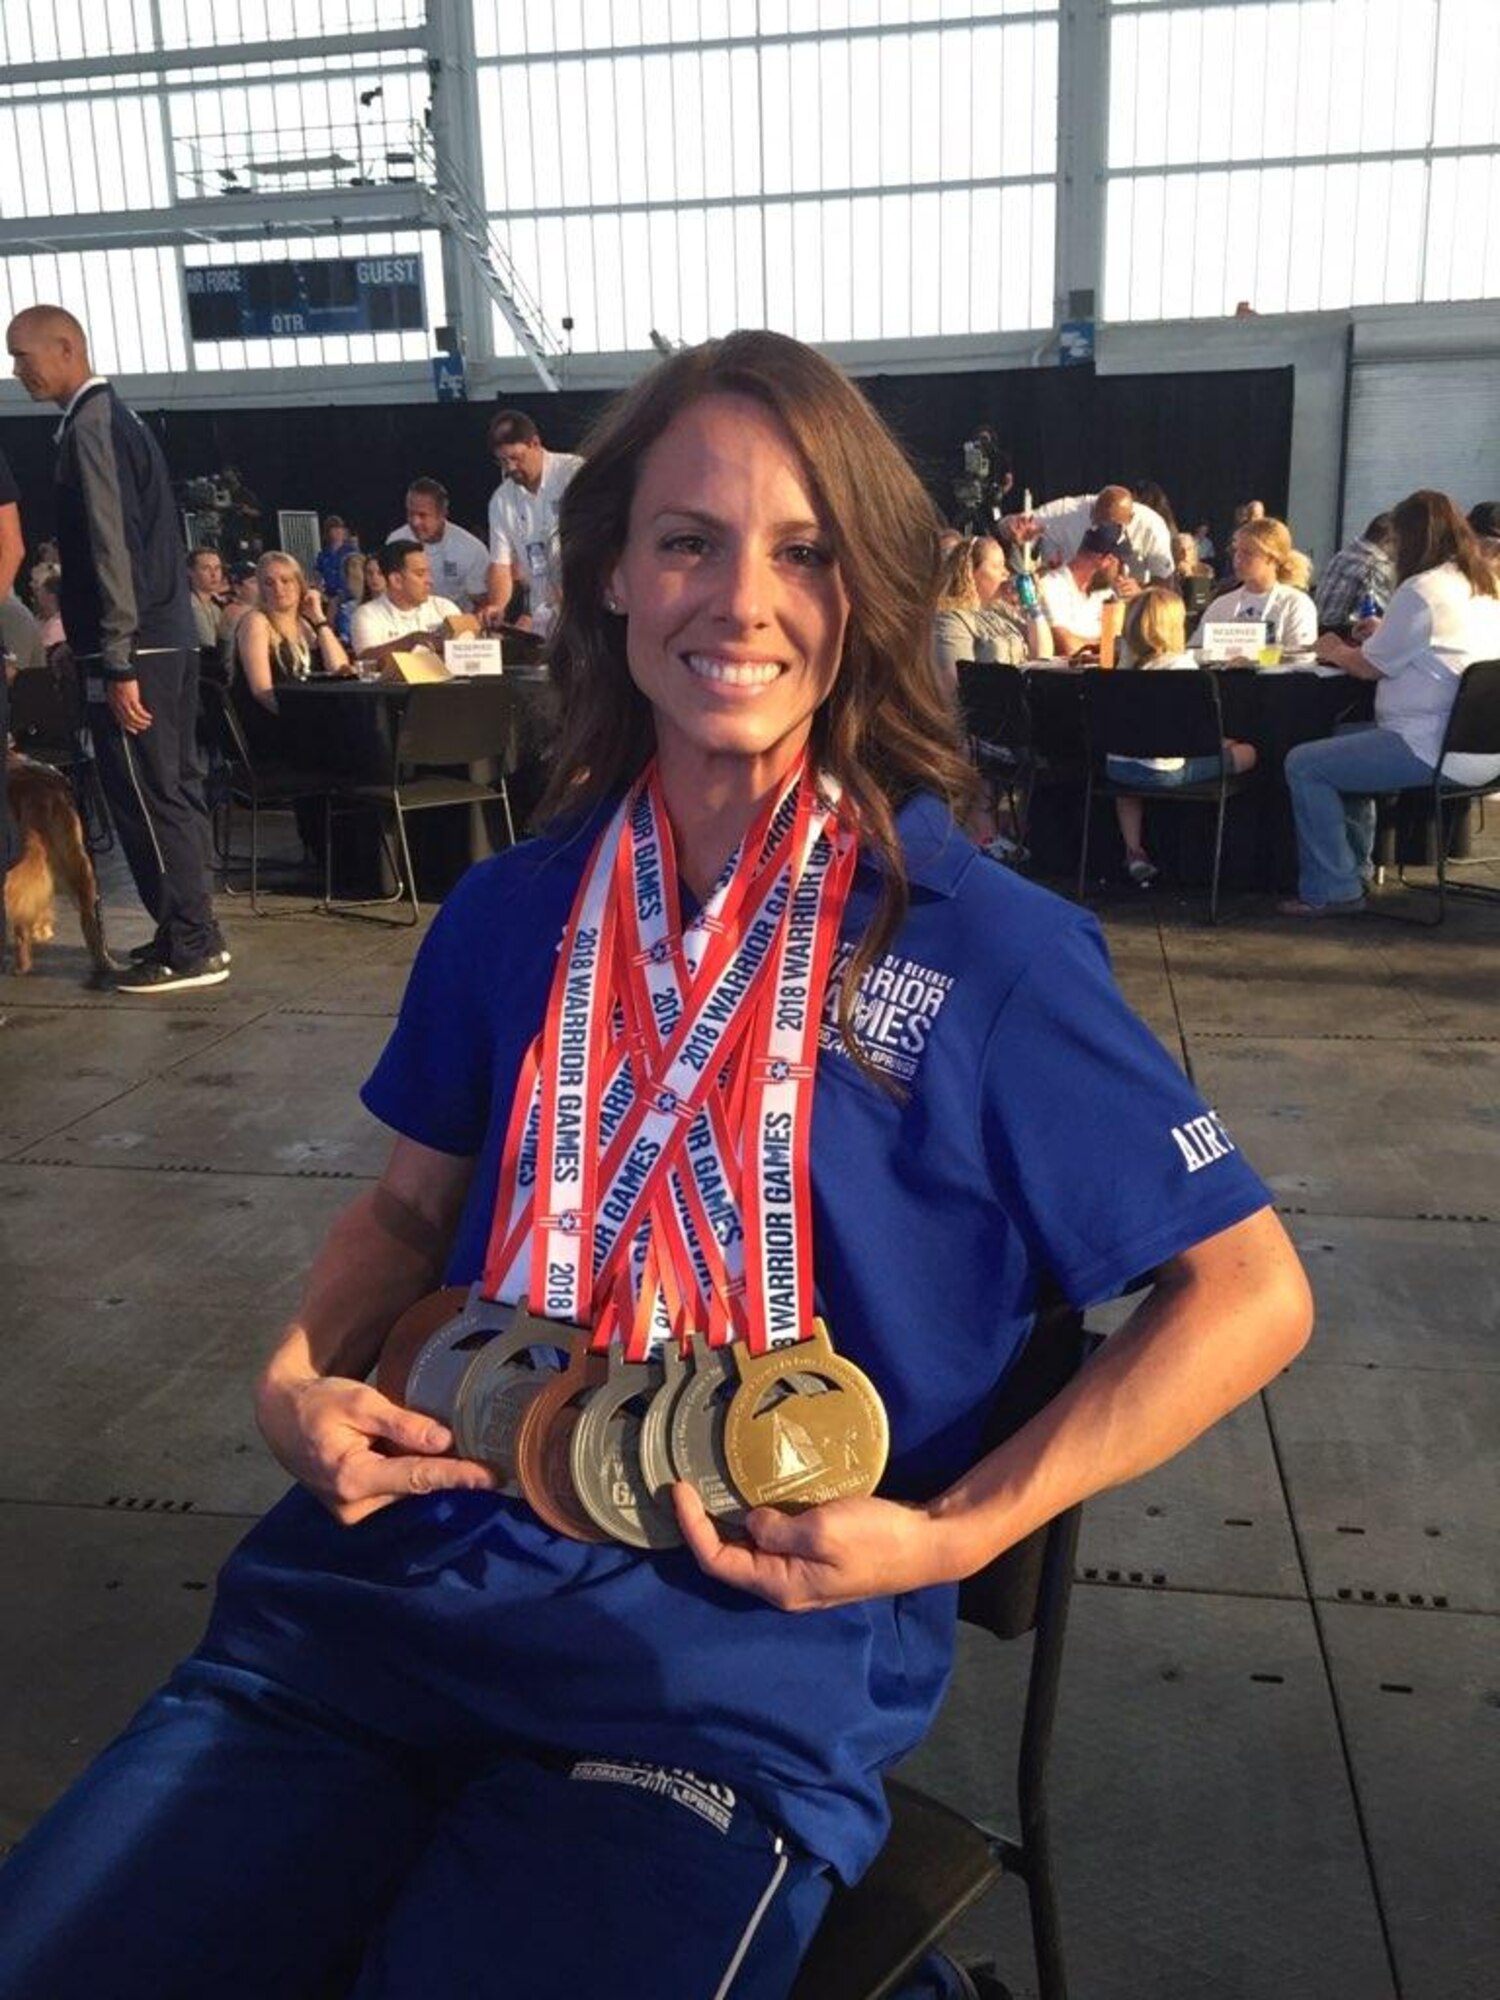 Master Sgt. Linn Dillard displays her medals won at the DoD Warrior Games, held June 1-9 at the U.S. Air Force Academy, Colorado Springs, Colorado. Dillard brought home gold medals in the 400 meters and the 4 x 100 meter relay, silver medals in the 100 and 200 meters, 50-meter breaststroke, and 200-meter freestyle mixed relay, and bronze medals in the 50 and 100-meter freestyle swim. (U.S. Air Force Courtesy Photo)